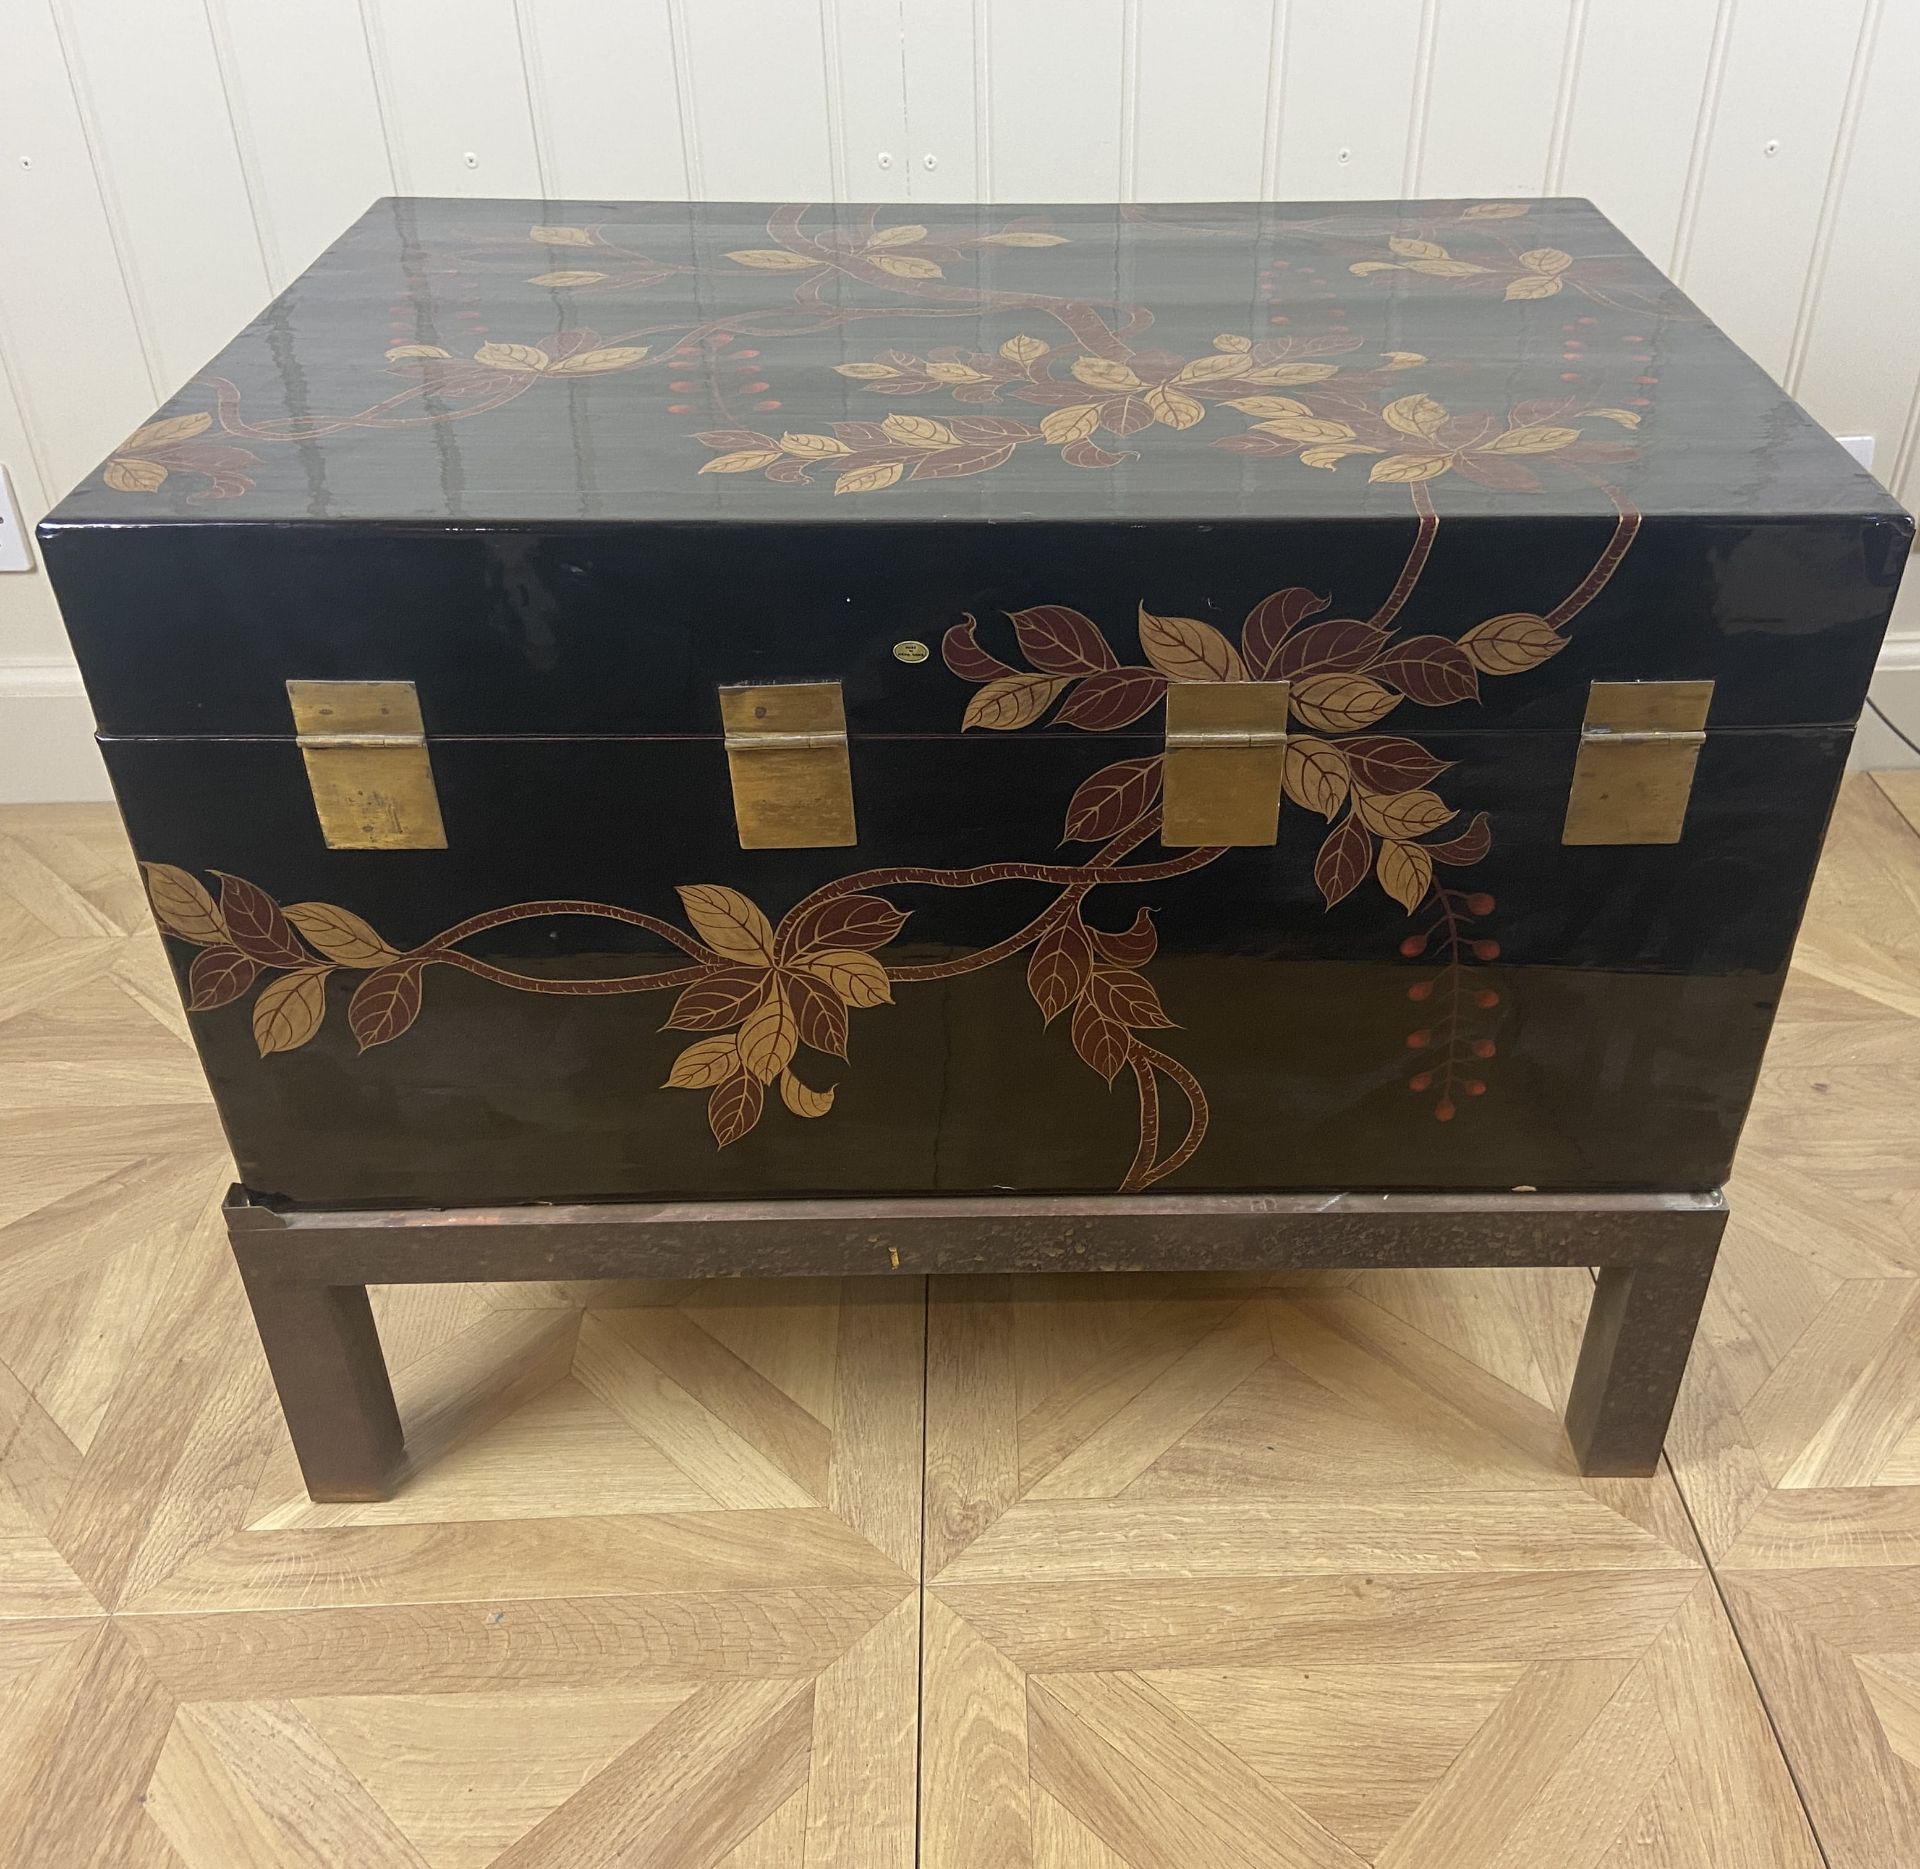 A 20th century Chinese black and gilt lacquer box on a metal stand - Image 4 of 5